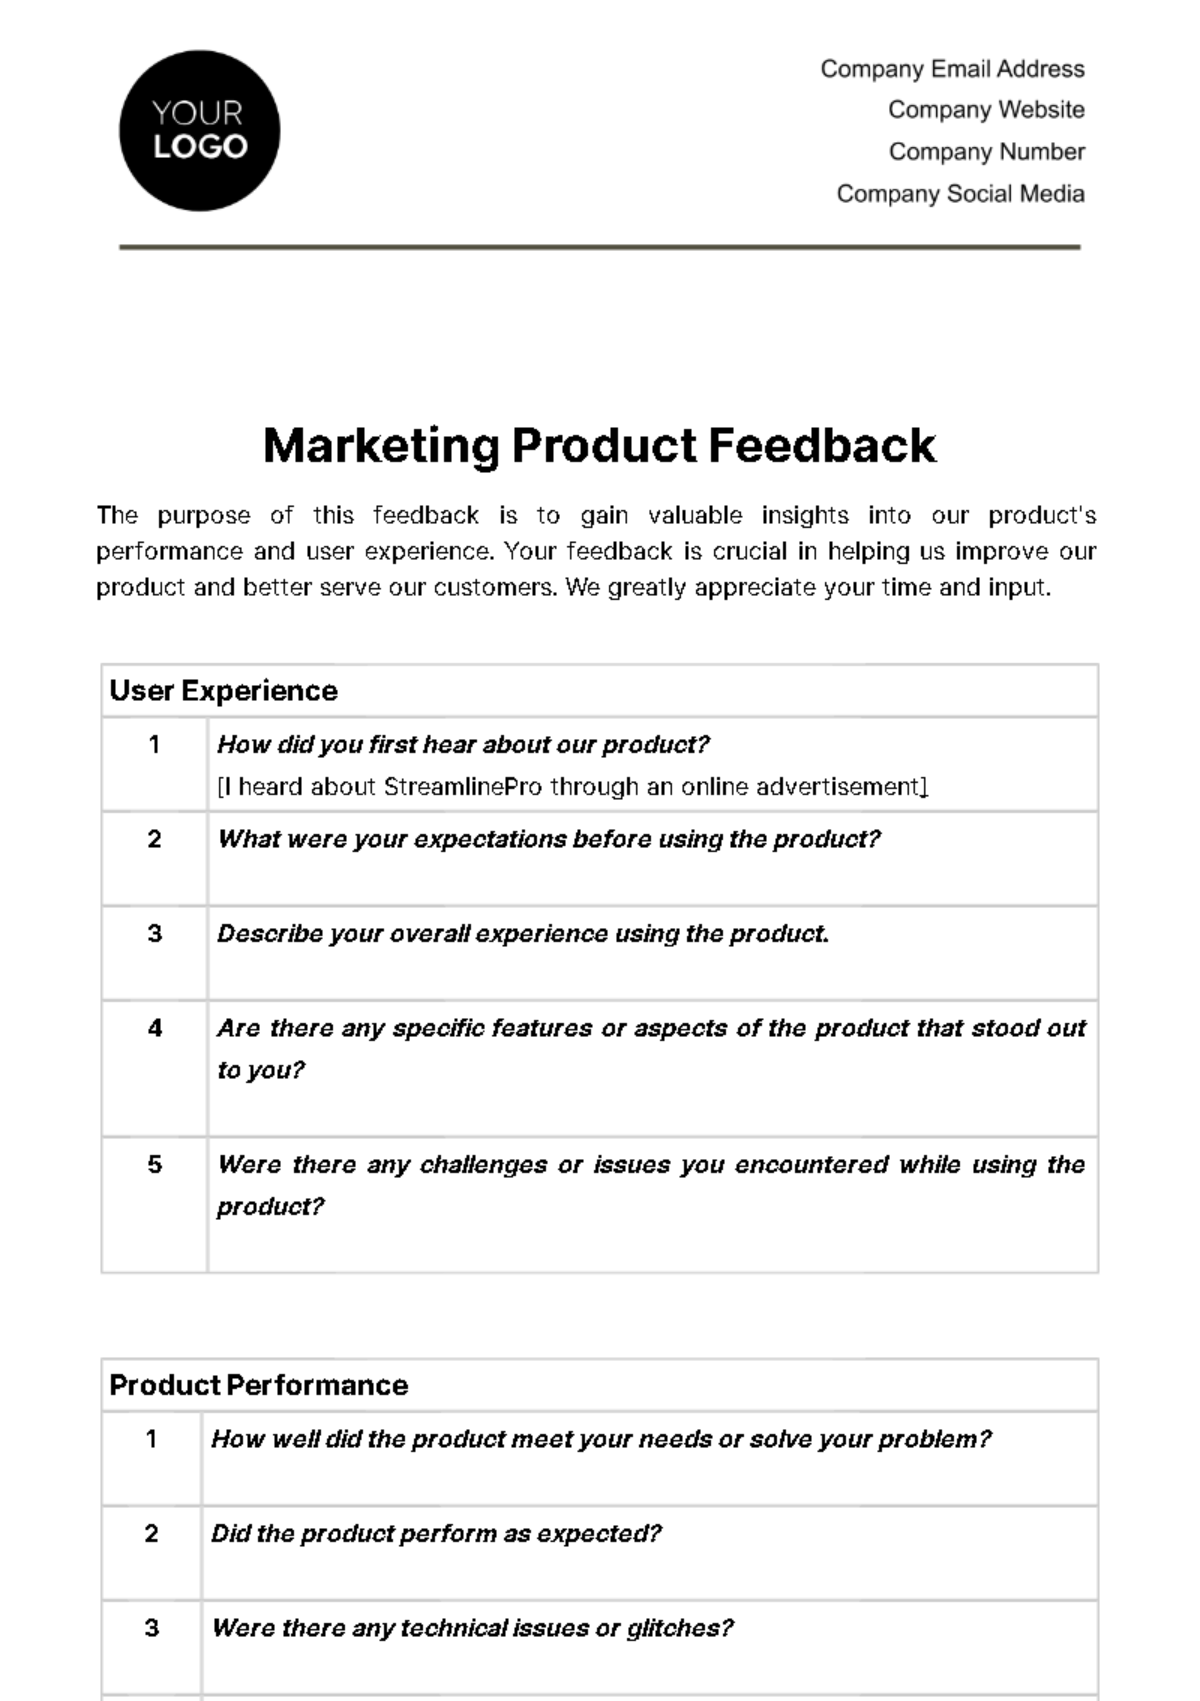 Free Marketing Product Feedback Outline Template